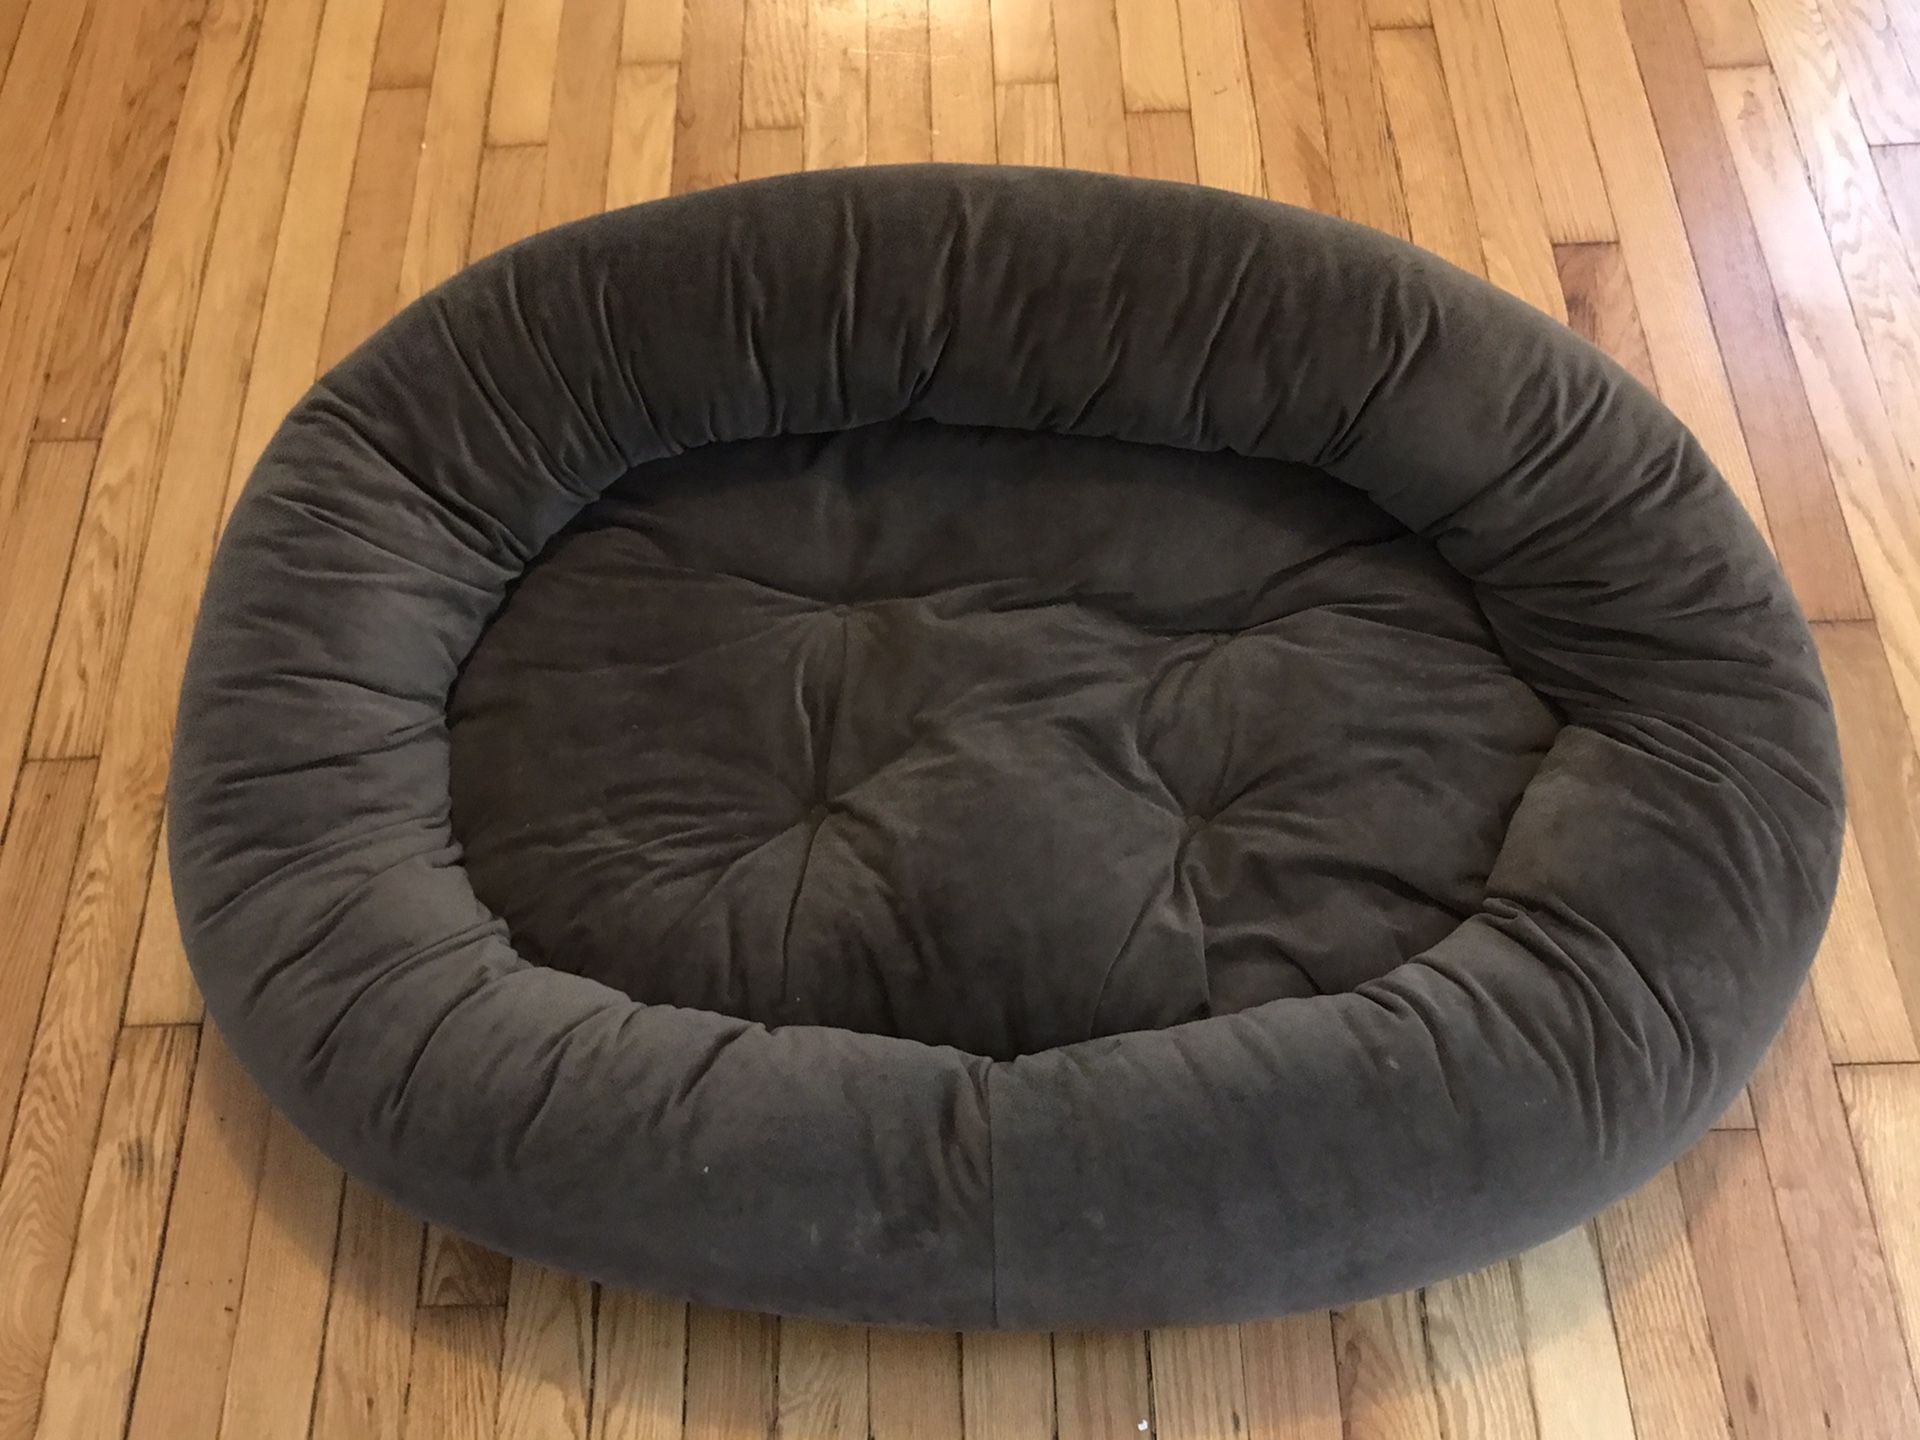 Dog Bed - $25 (Lakeview)